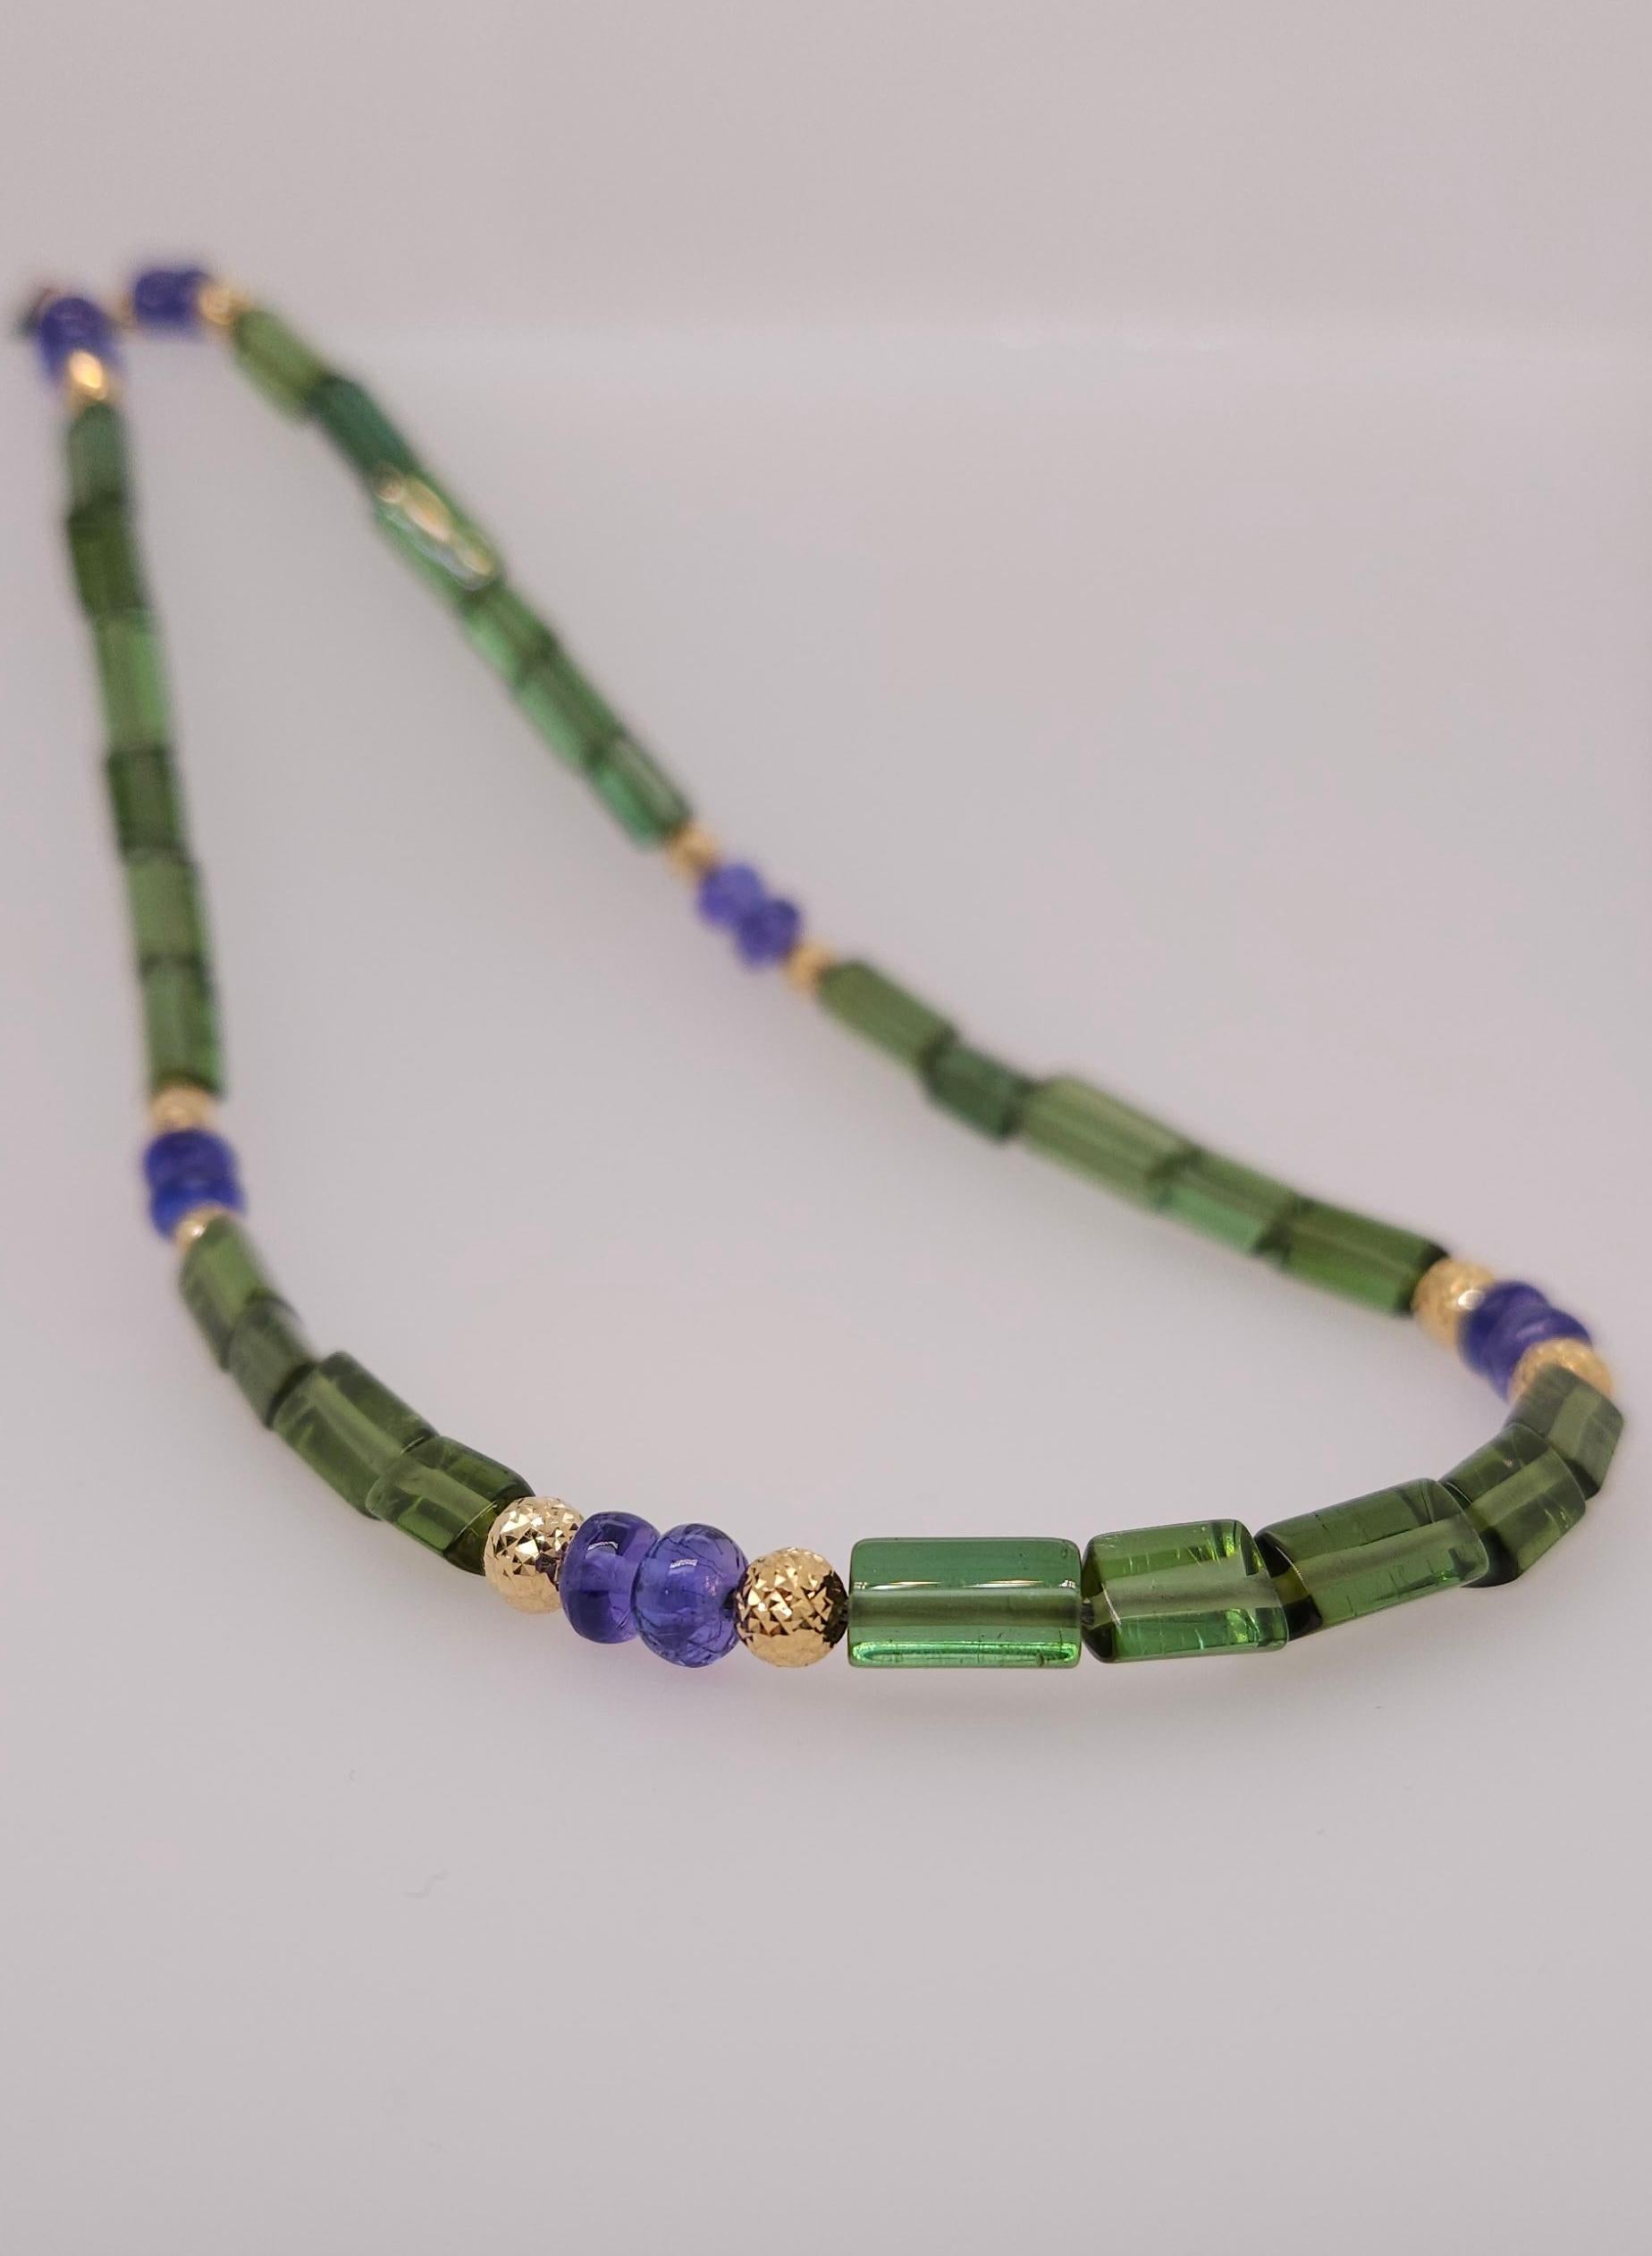 Green Tourmaline Crystal & Tanzanite Beaded Necklace with 18 Carat yellow Gold For Sale 4